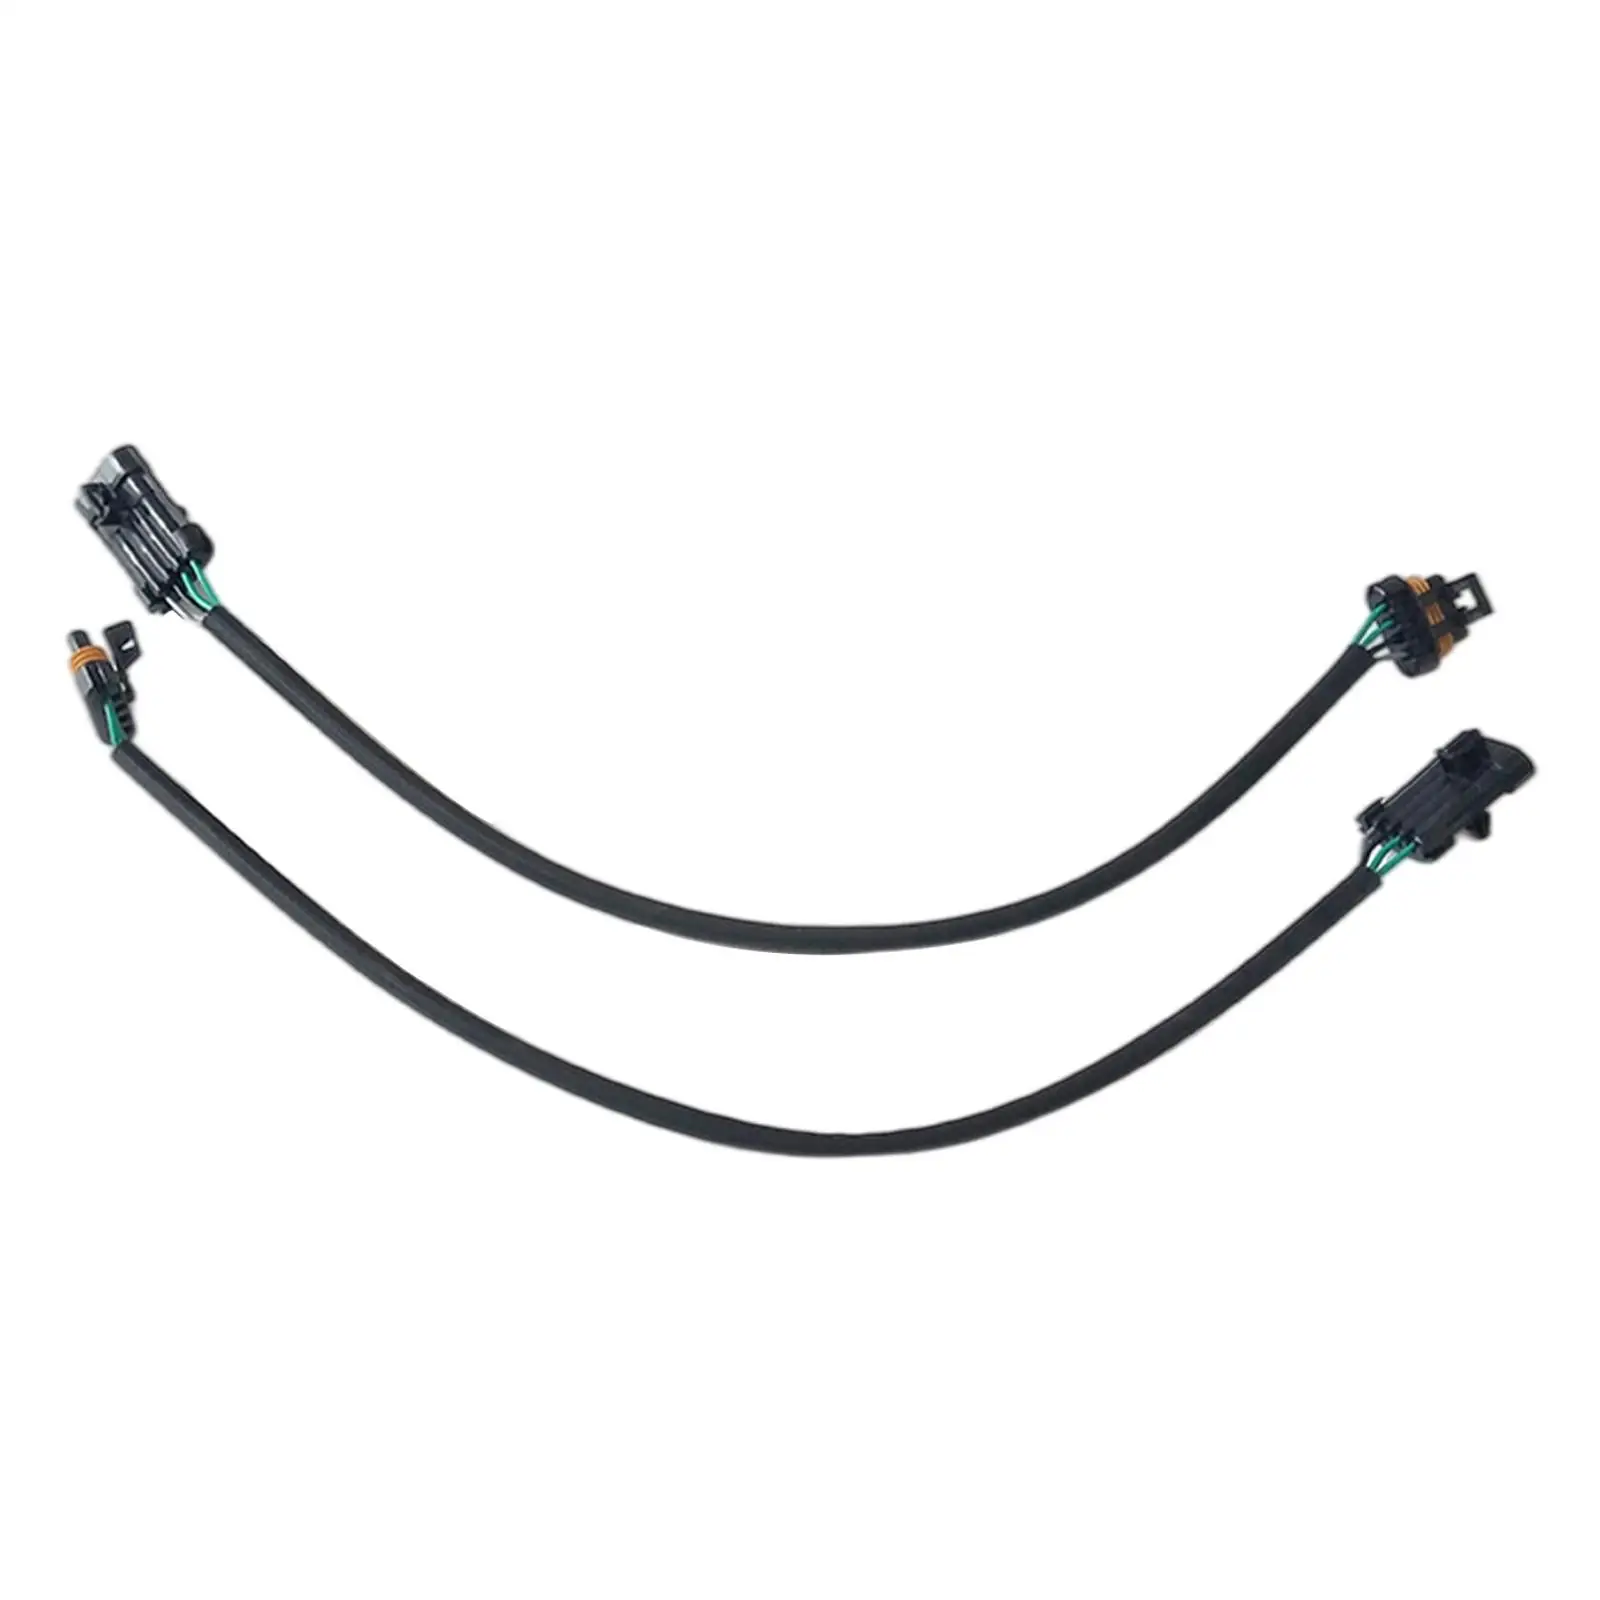 Oxygen O2 Sensor  Wiring for Commodore  VT VX Vy  Vehicle Parts